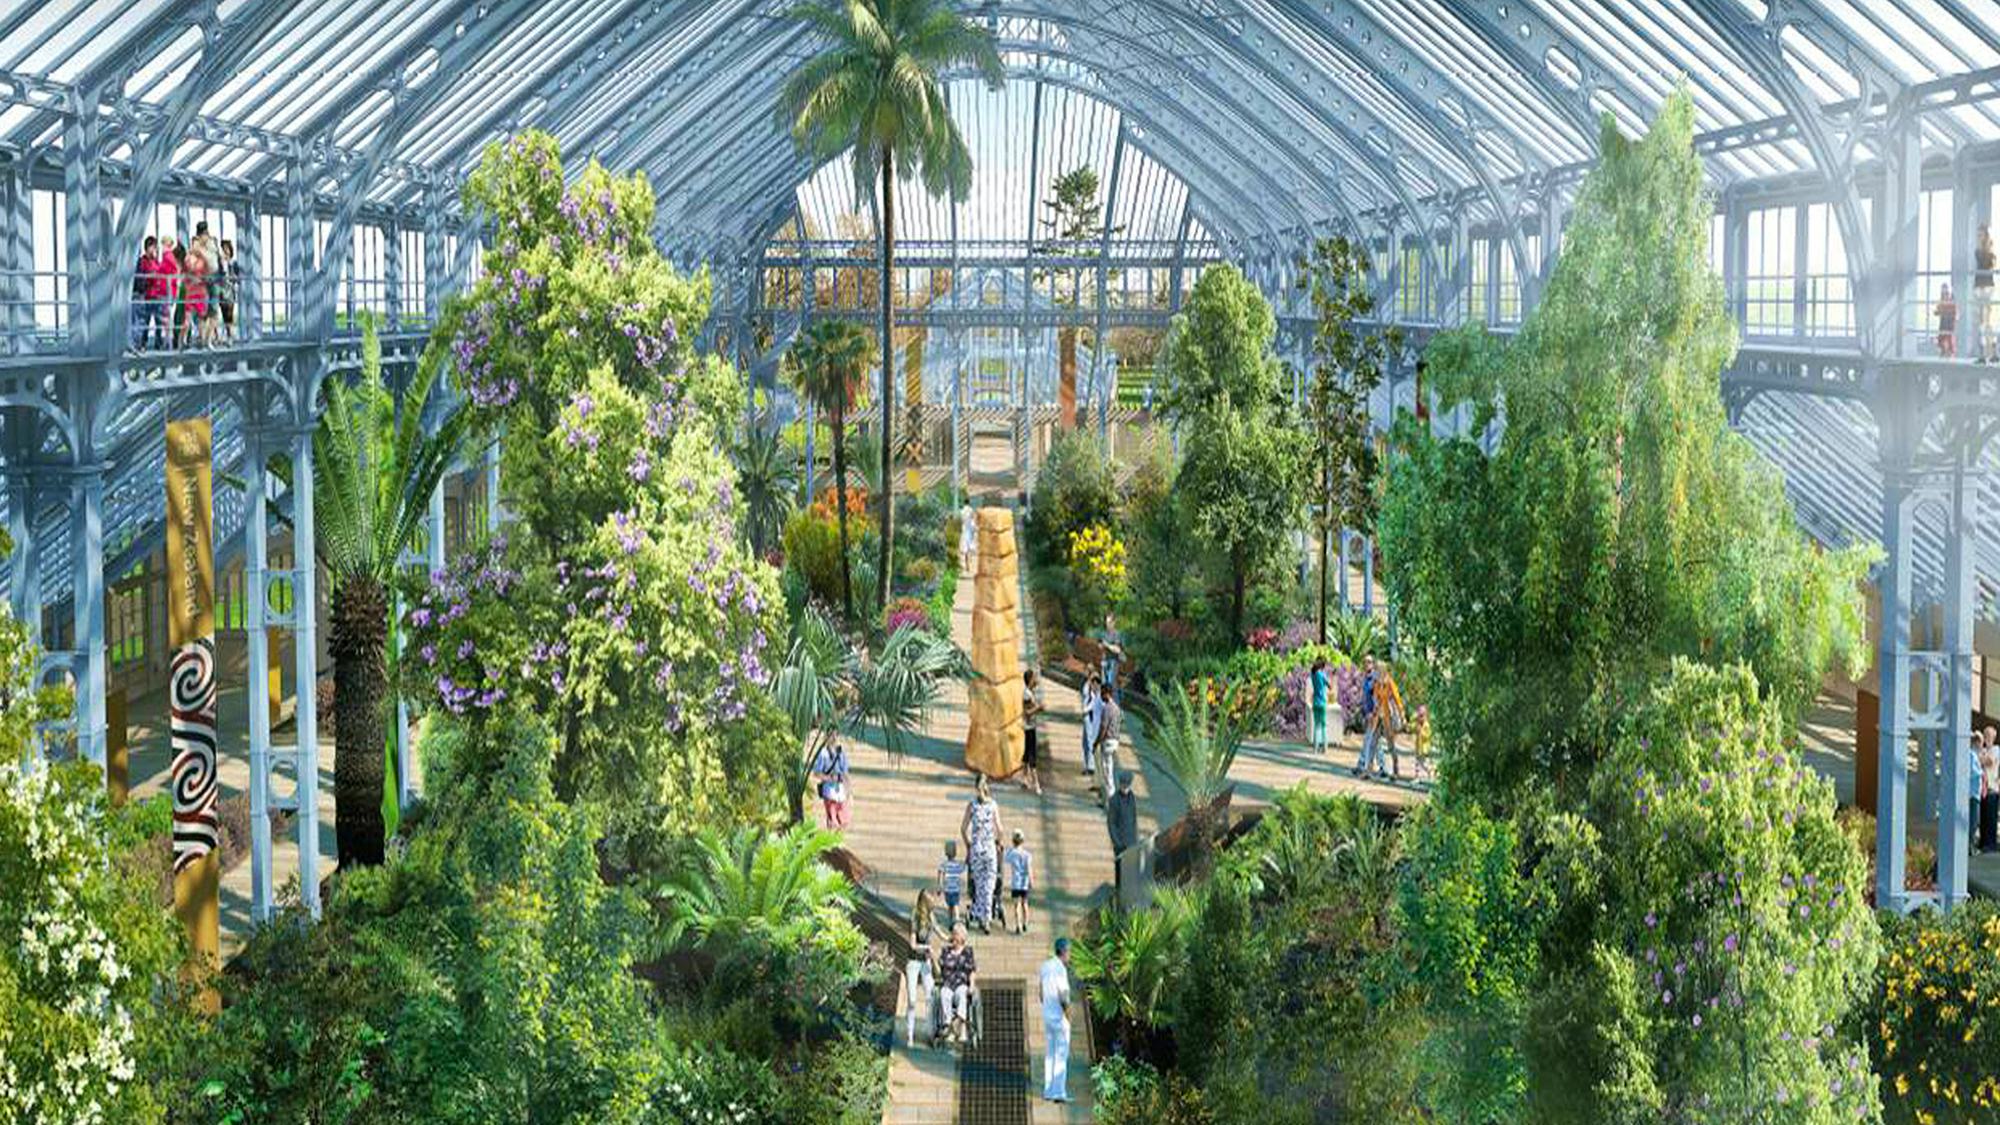 Kews Gardens Temperate House summer party destination reopens 5 May 2018